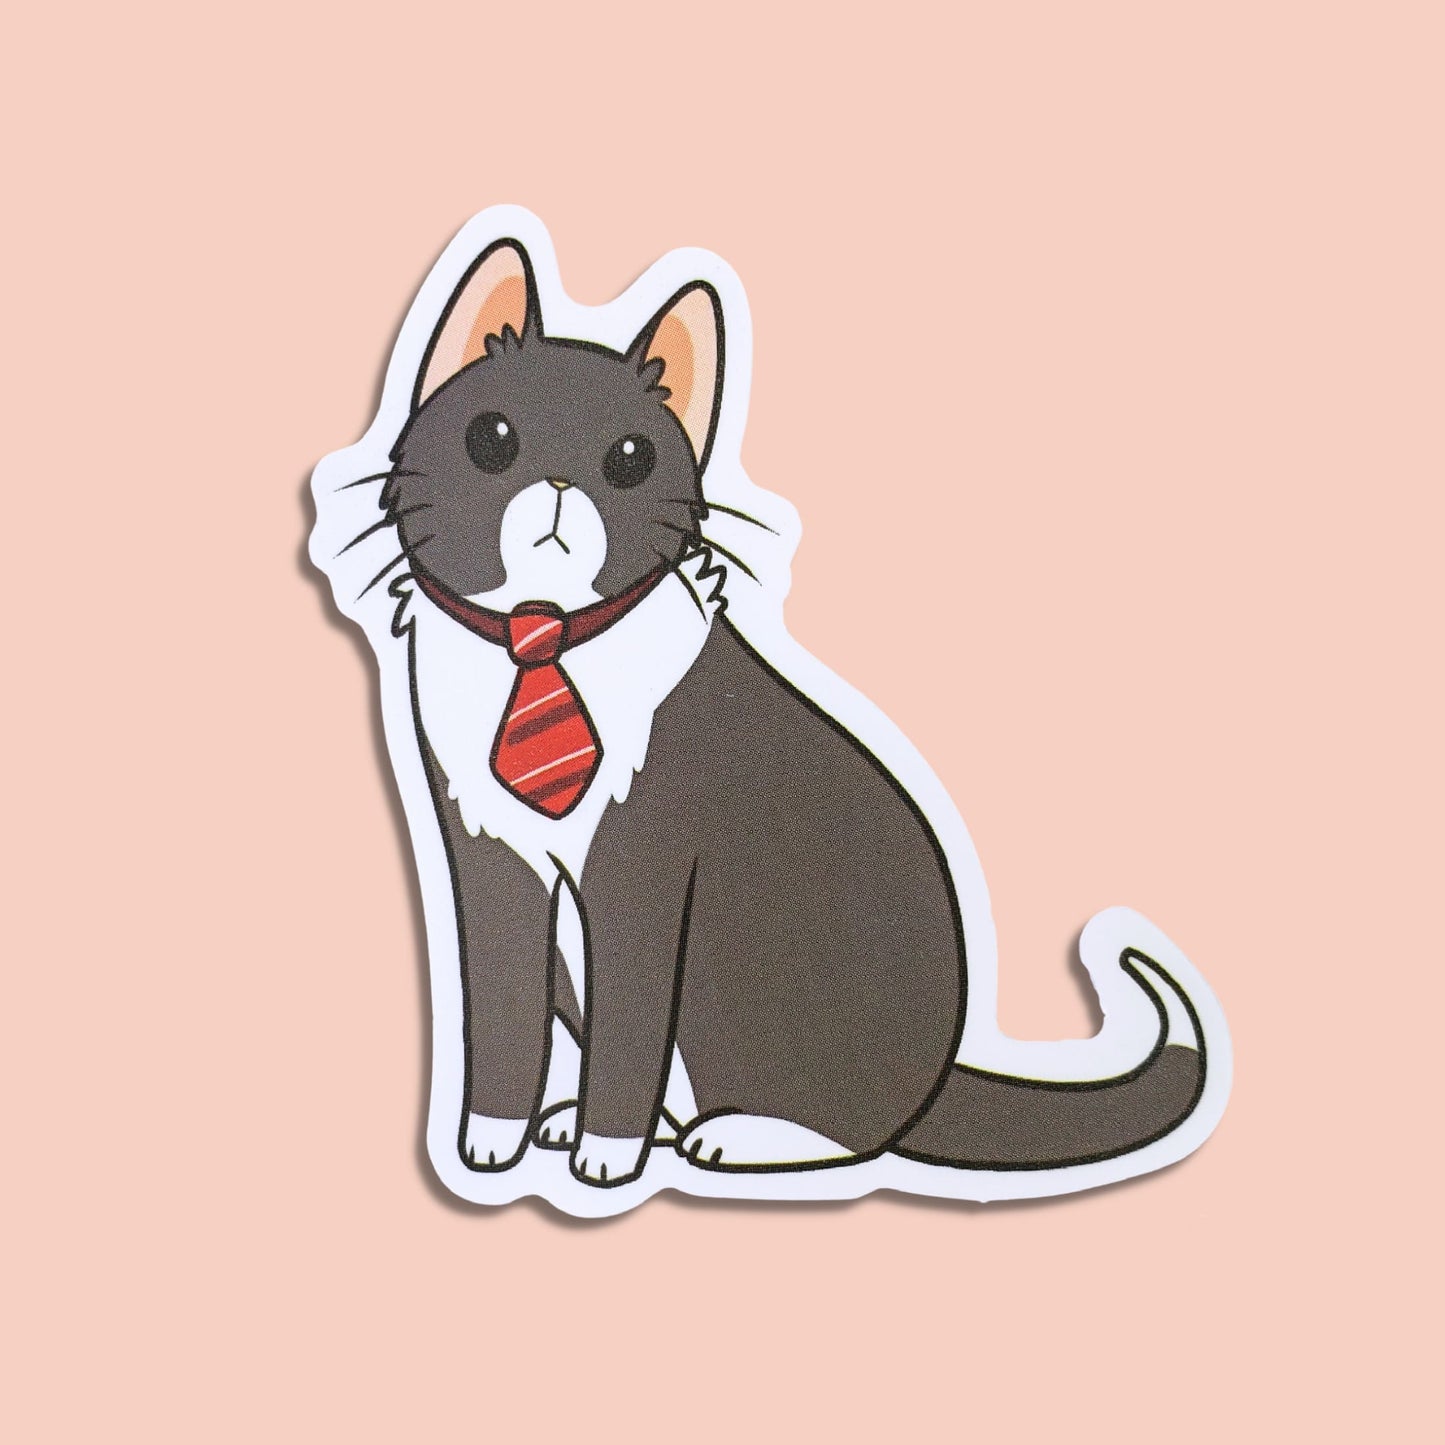 Black and White Cat in a Tie Waterproof Sticker | Cat Boss from Confetti Kitty, Only 1.00